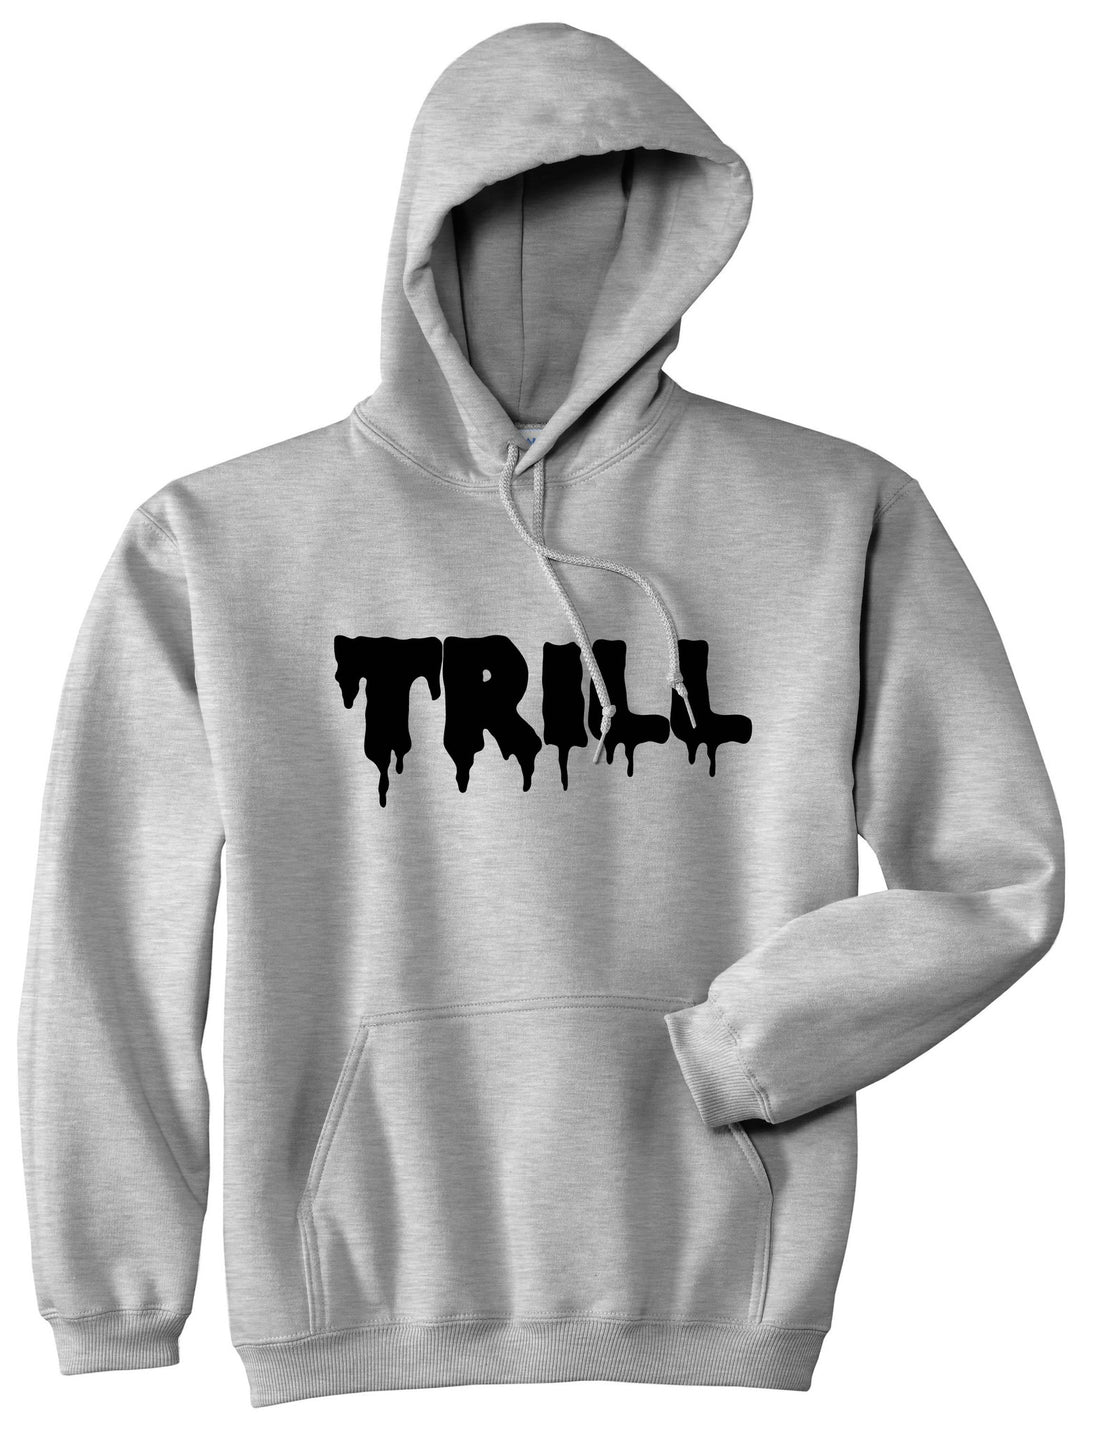 Trill Blood New York Bx Been Style Fashion Pullover Hoodie Hoody In Grey by Kings Of NY